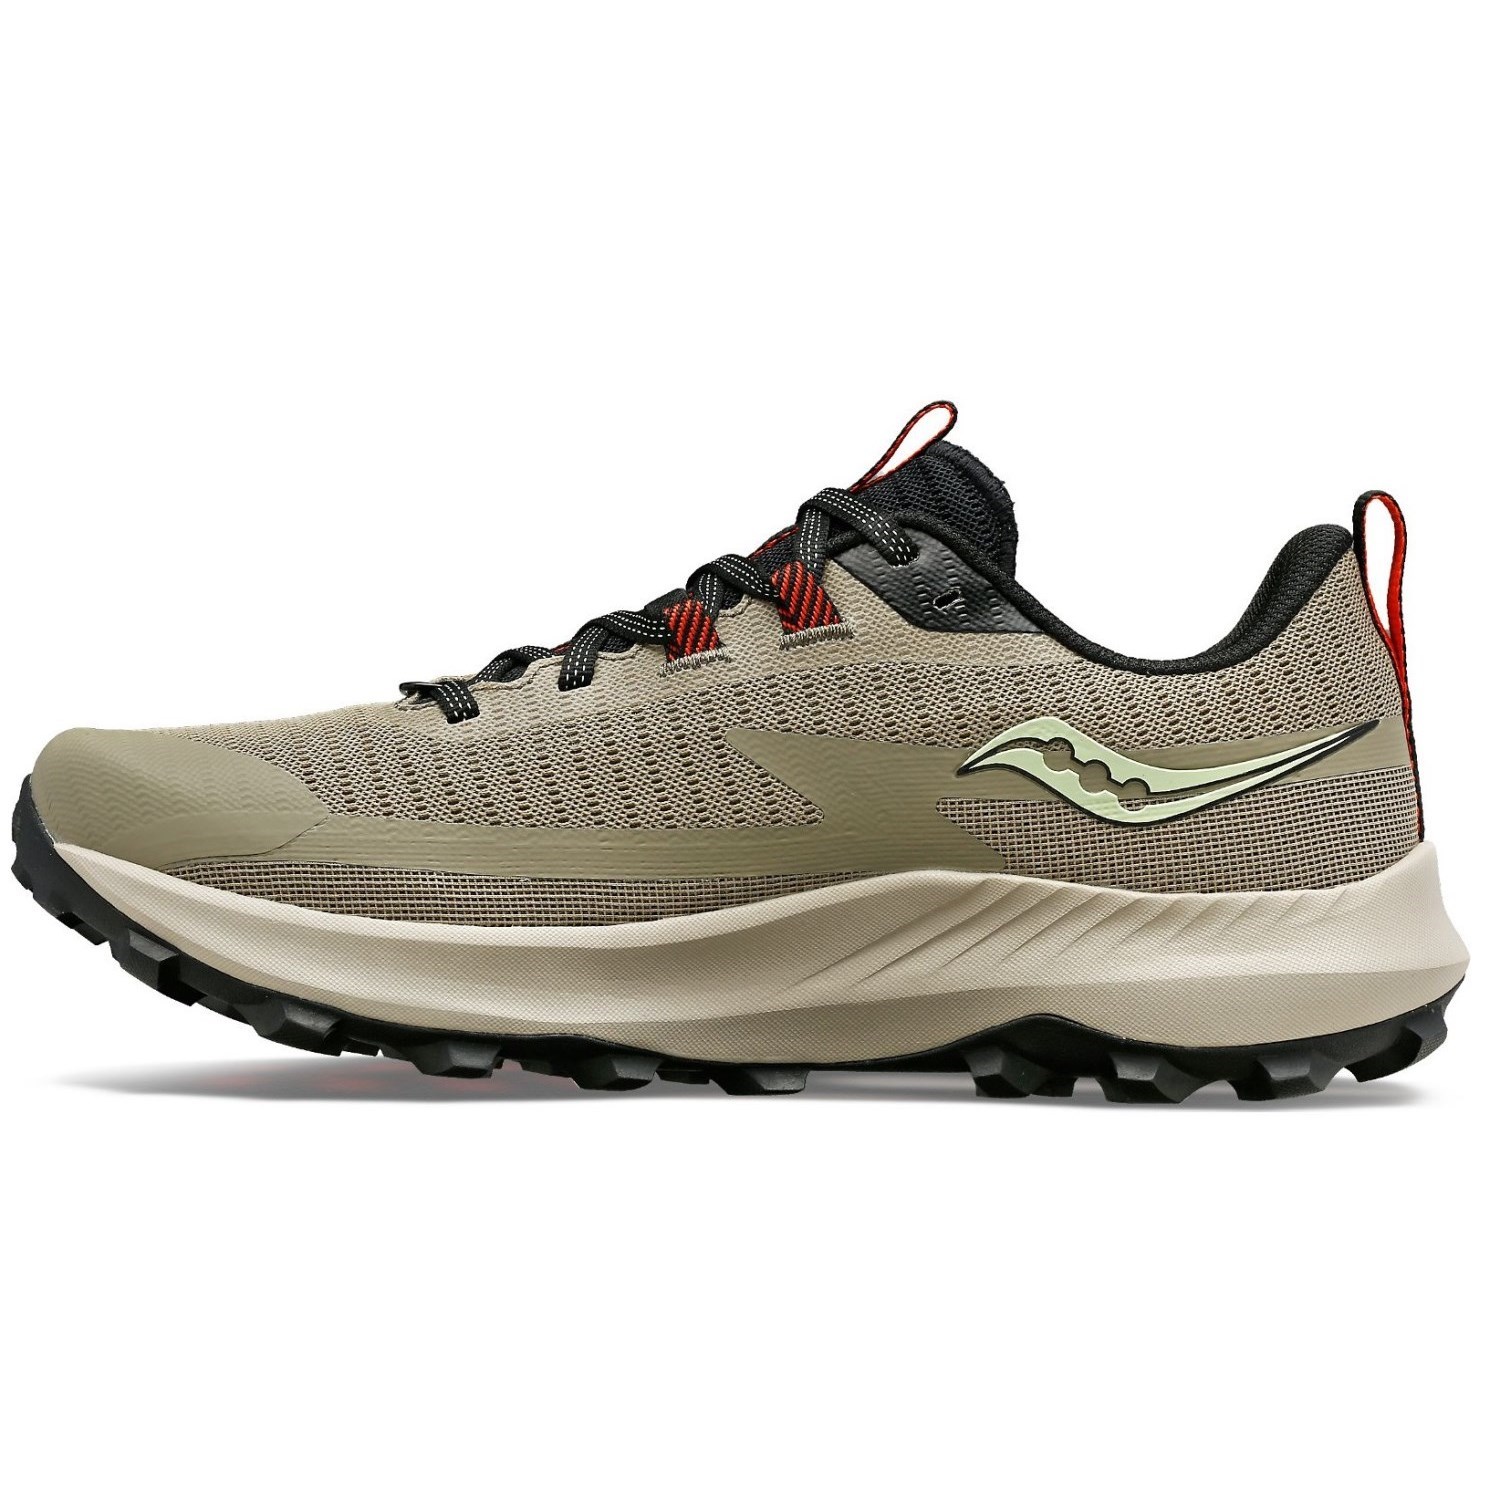 Saucony Peregrine 13 - Mens Trail Running Shoes - Coffee/Black | Sportitude